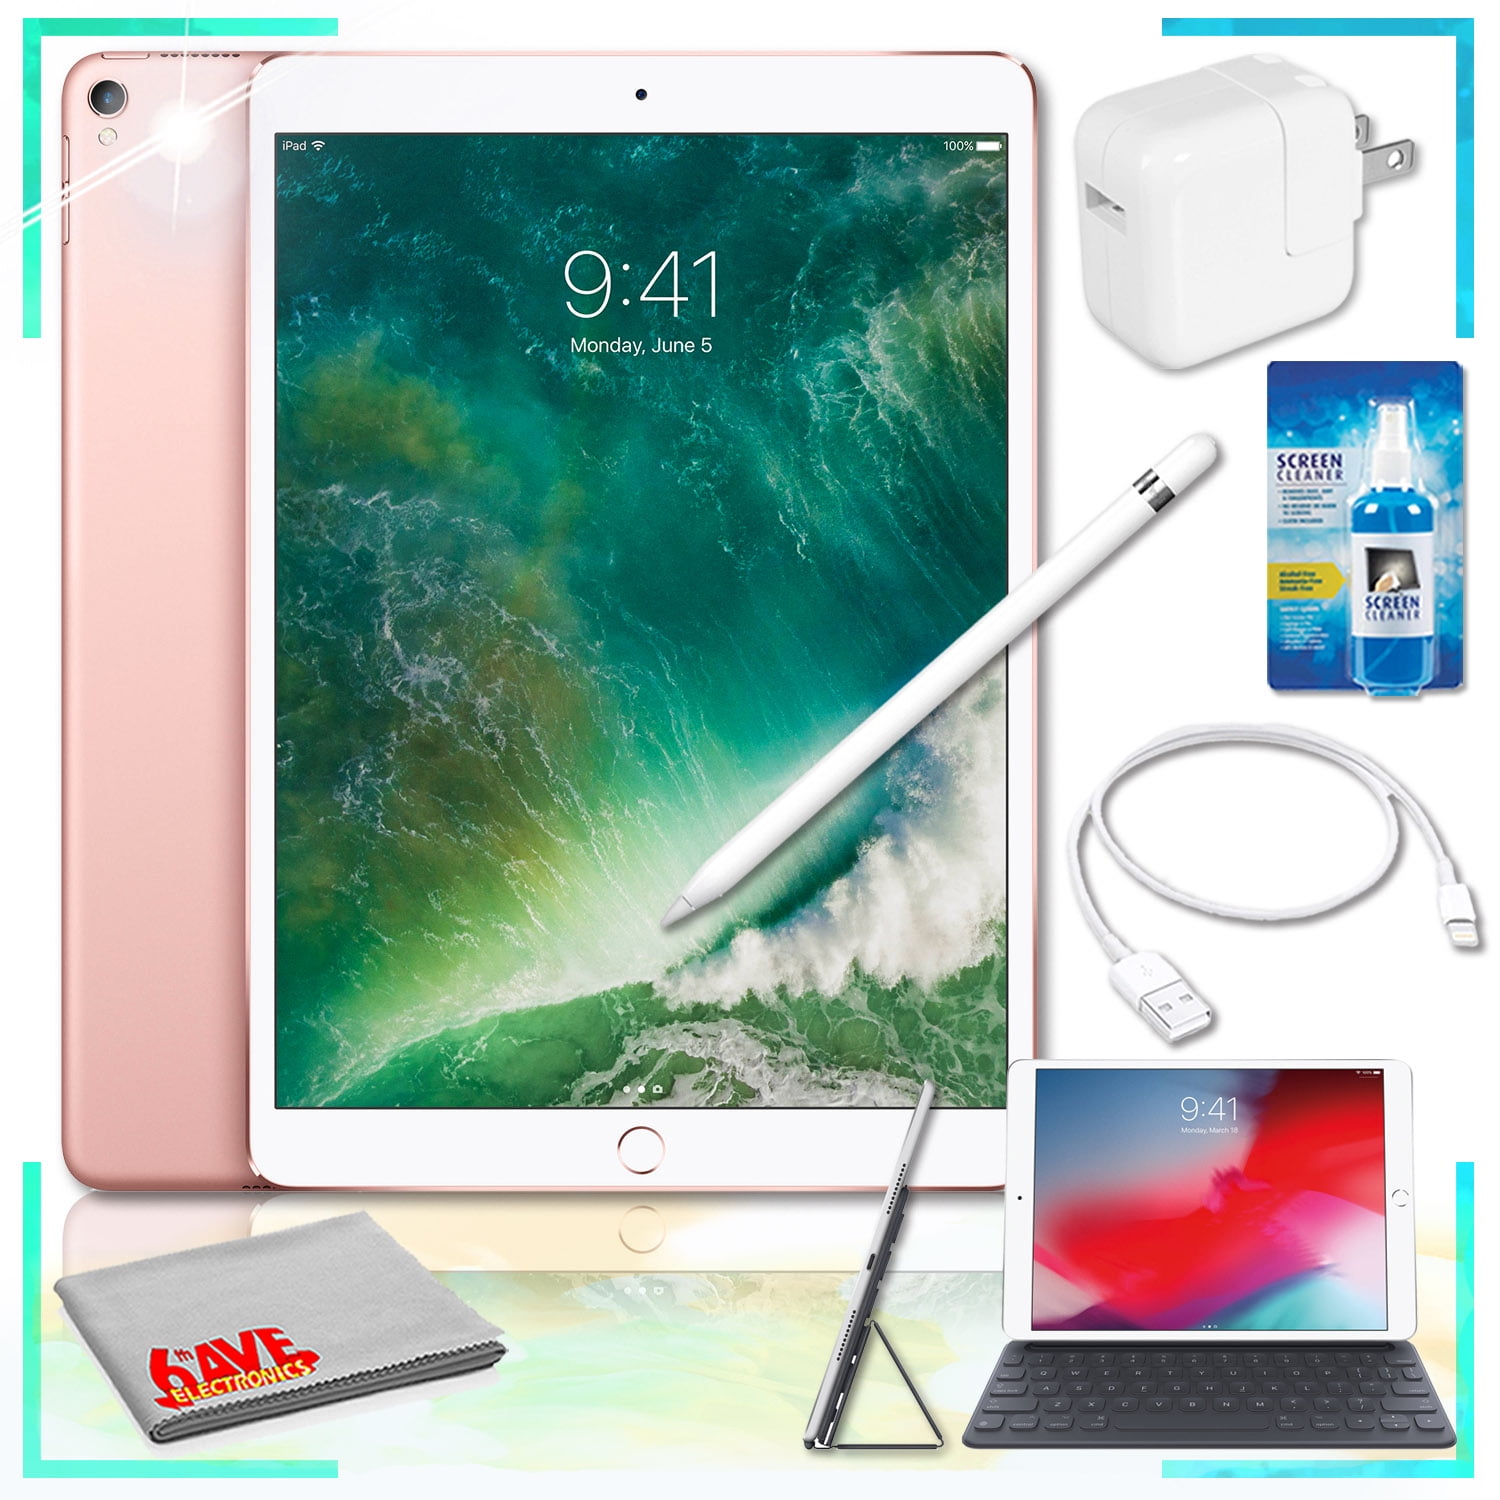 Apple 10.5in iPad Pro 256GB (Rose Gold) with Apple Pencil, Smart Keyboard  and Screen Cleaner Keyboard Bundle